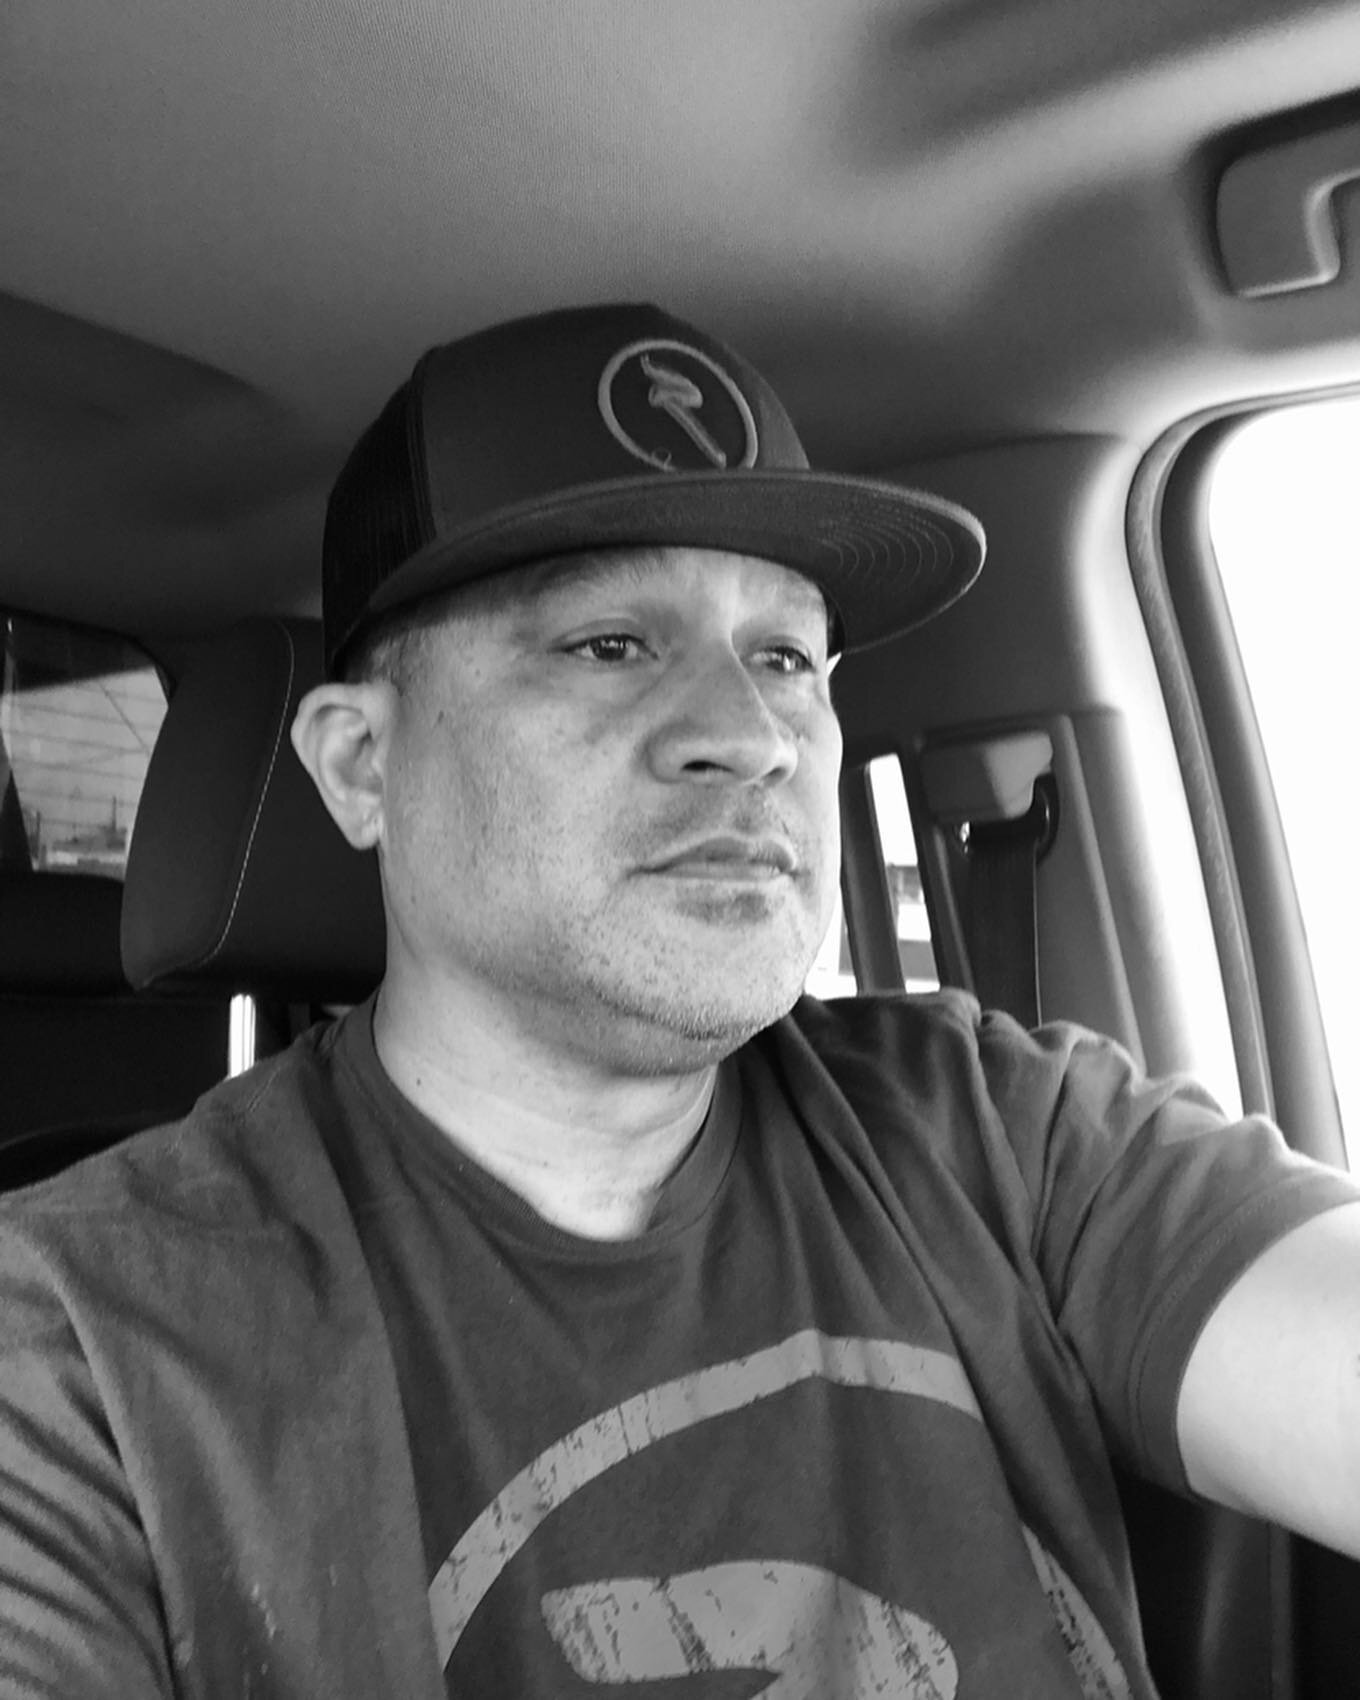 The grind is real...
Stay on your game🔥
Signature R snap back and T-shirt

George Malauulu
President Aiga Foundation 
@aigafoundation 

#motivation #drive #determination #makingadifference #studentathlete #sports #education #family #aiga #community 